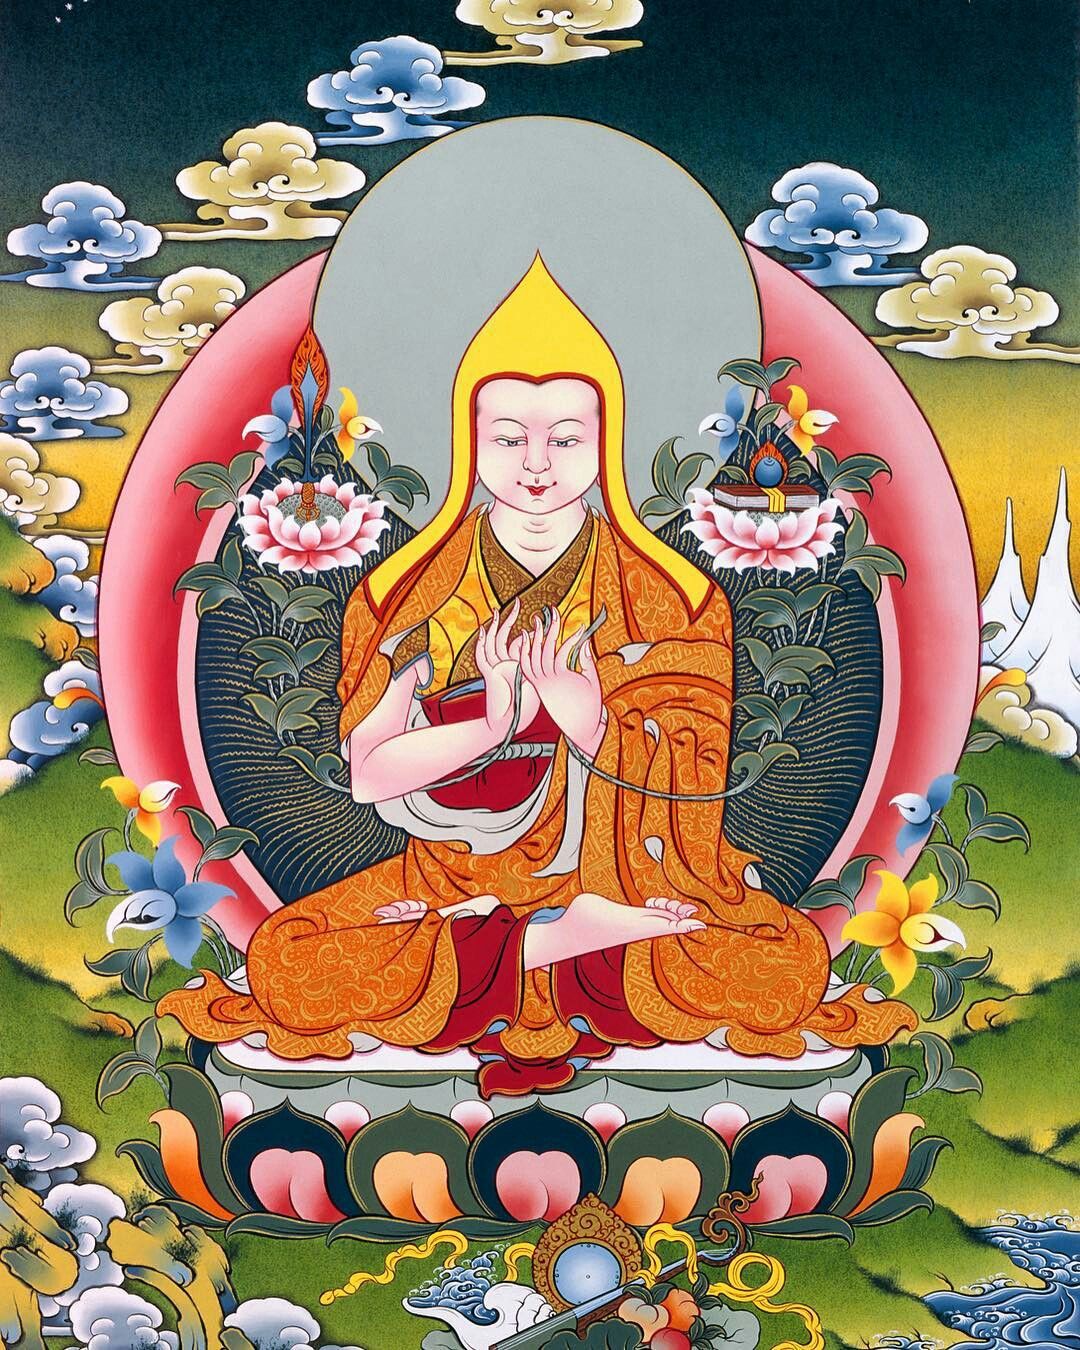 Read more about the article Je Tsongkhapa Day 2020